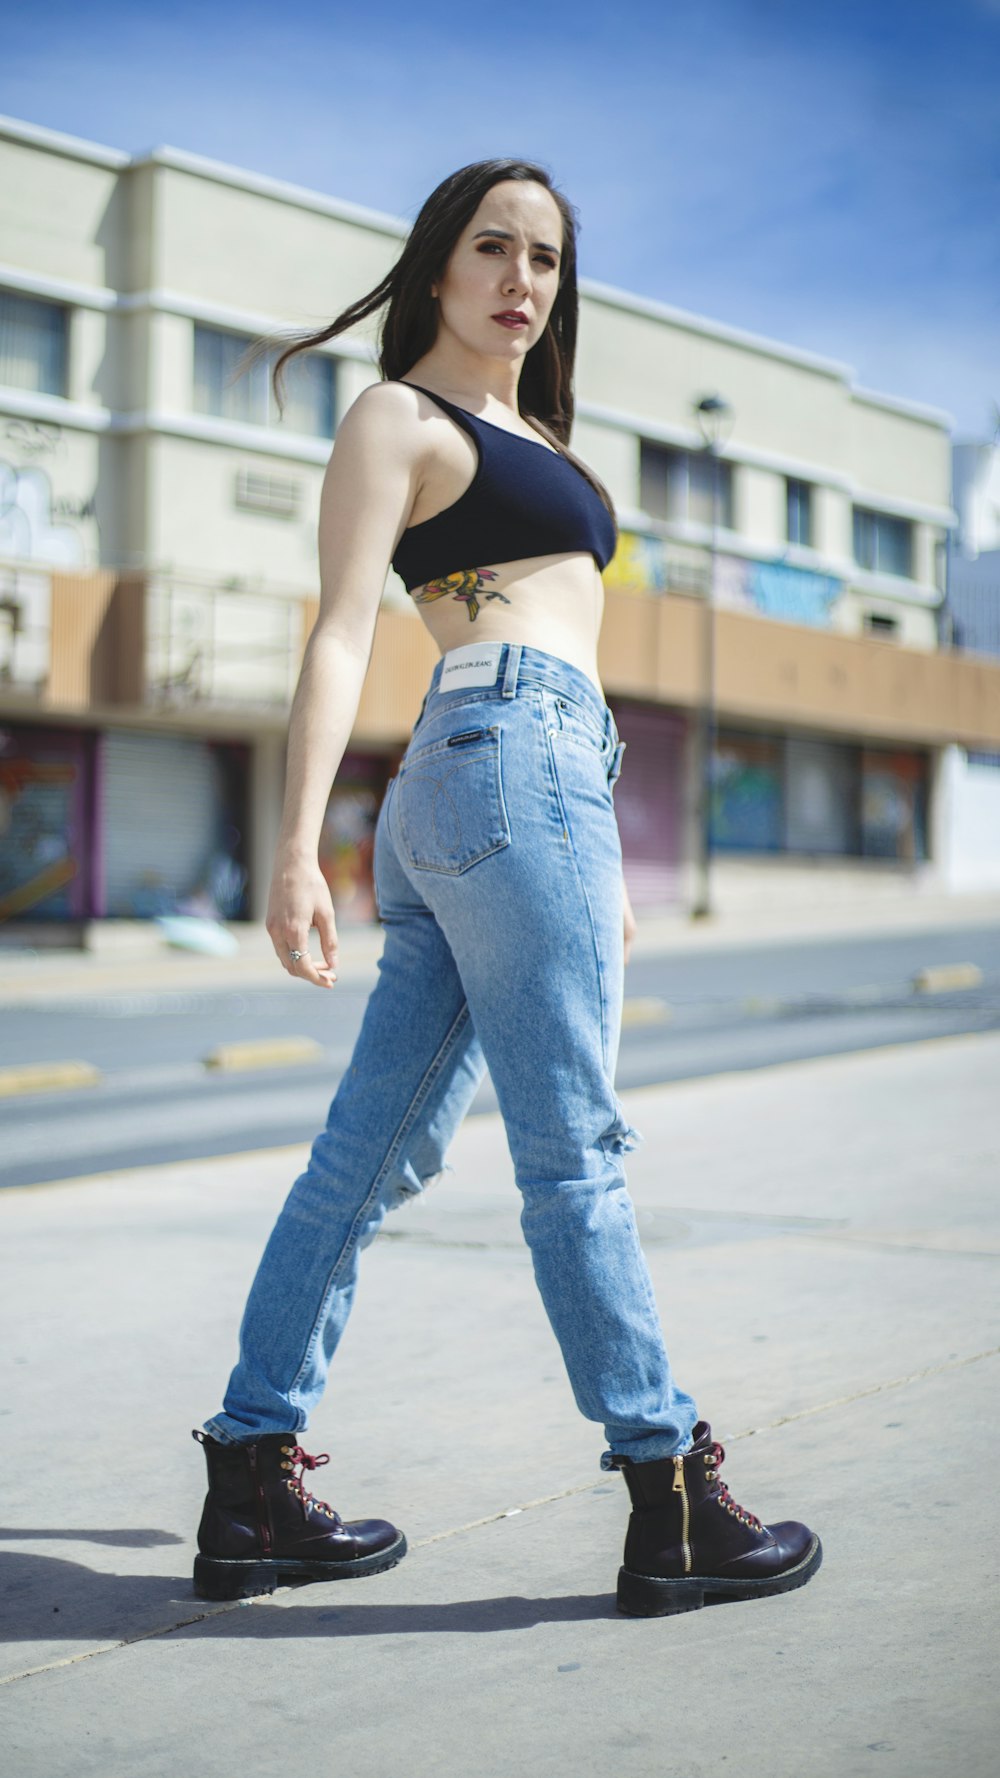 woman in blue denim jeans and black sports bra standing on road during daytime